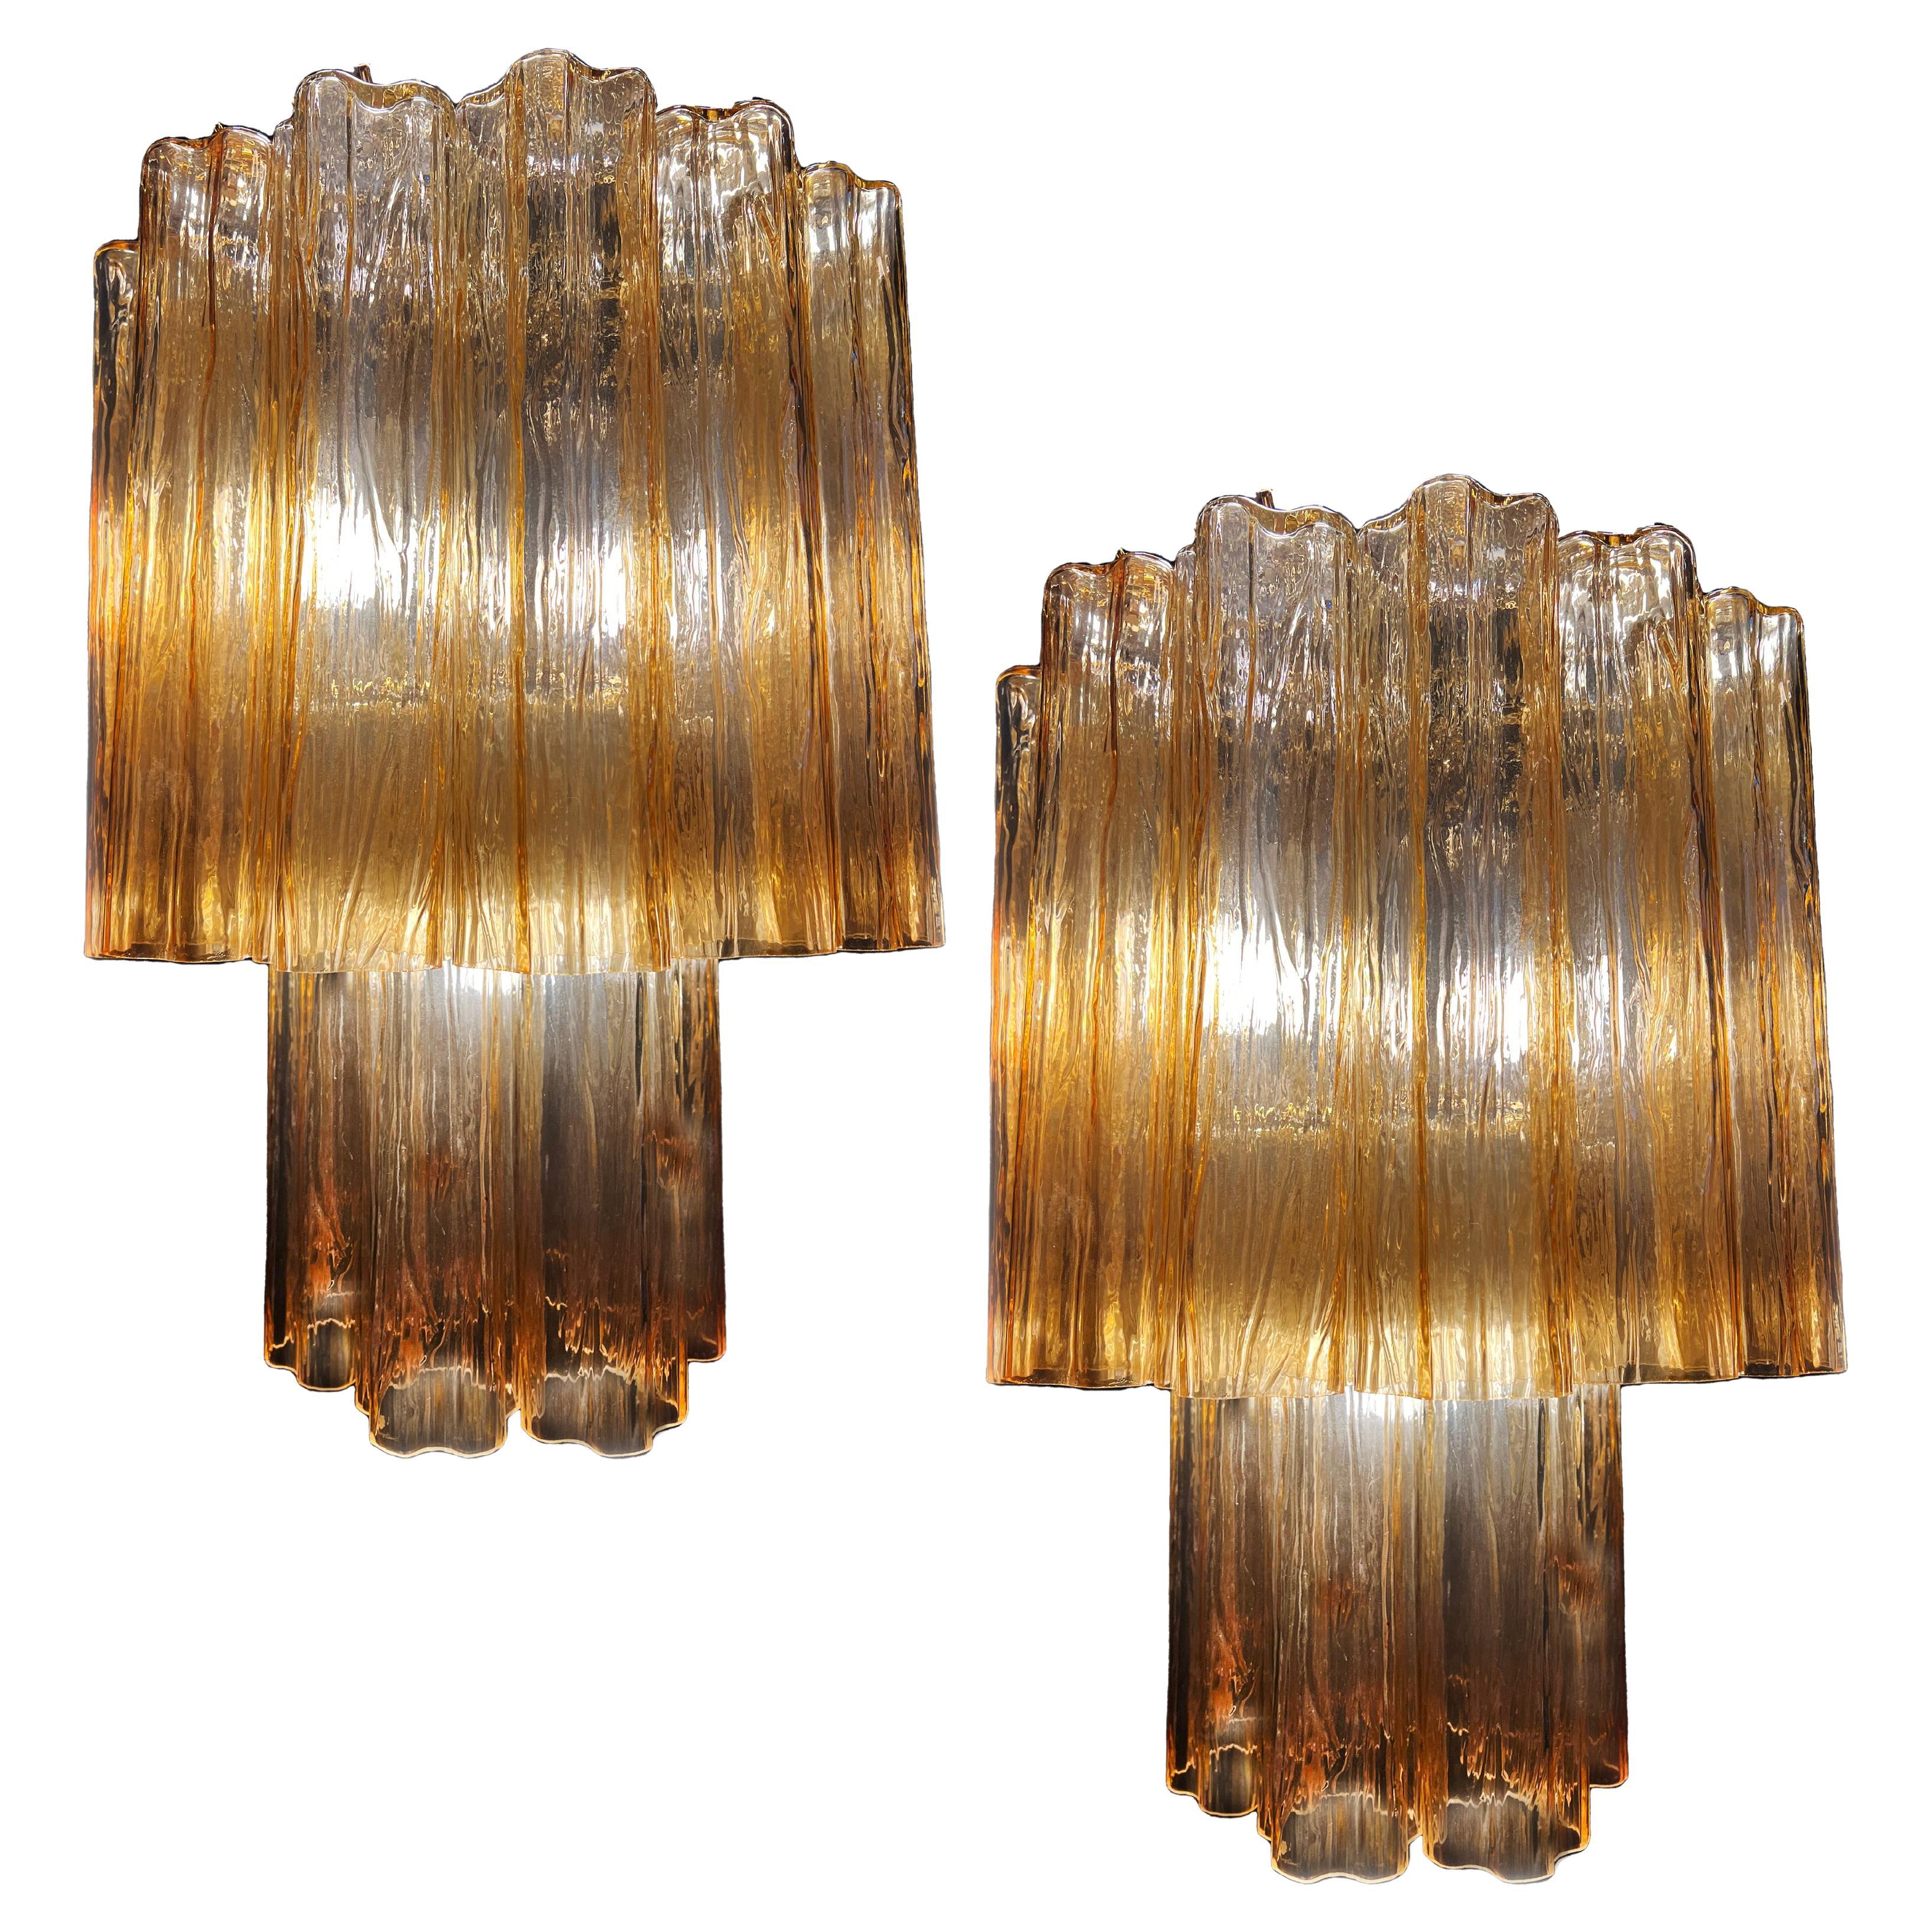 Elegant and refined pair of Murano chandeliers. The warm amber color vibrates with shades of gold, the effect is magnetic and sophisticated. The height without chain is 72 cm.